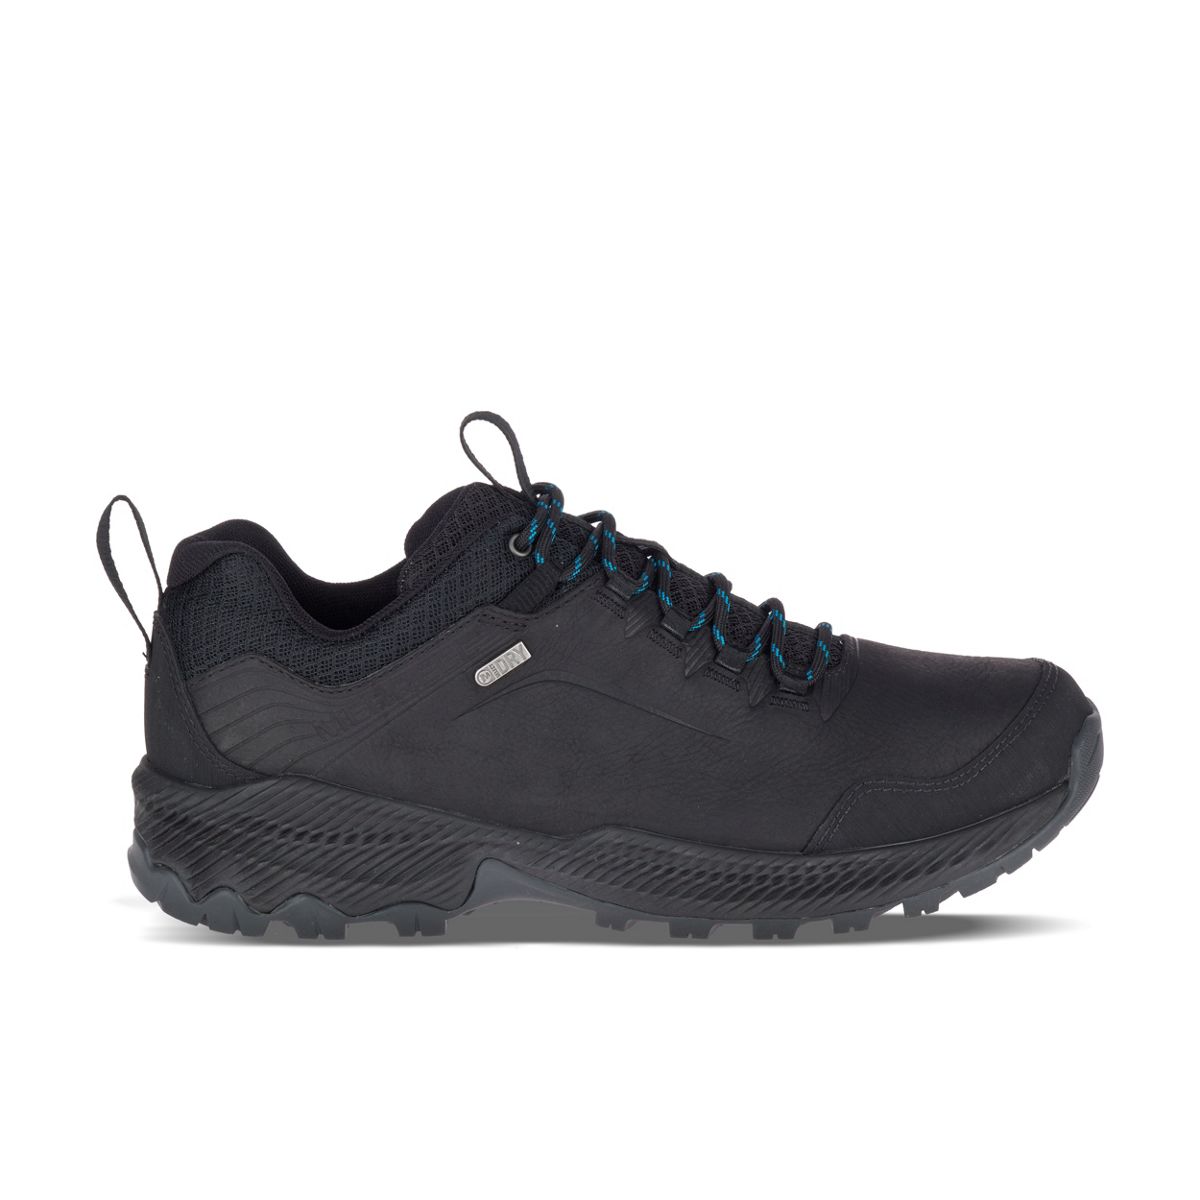 merrell water resistant shoes